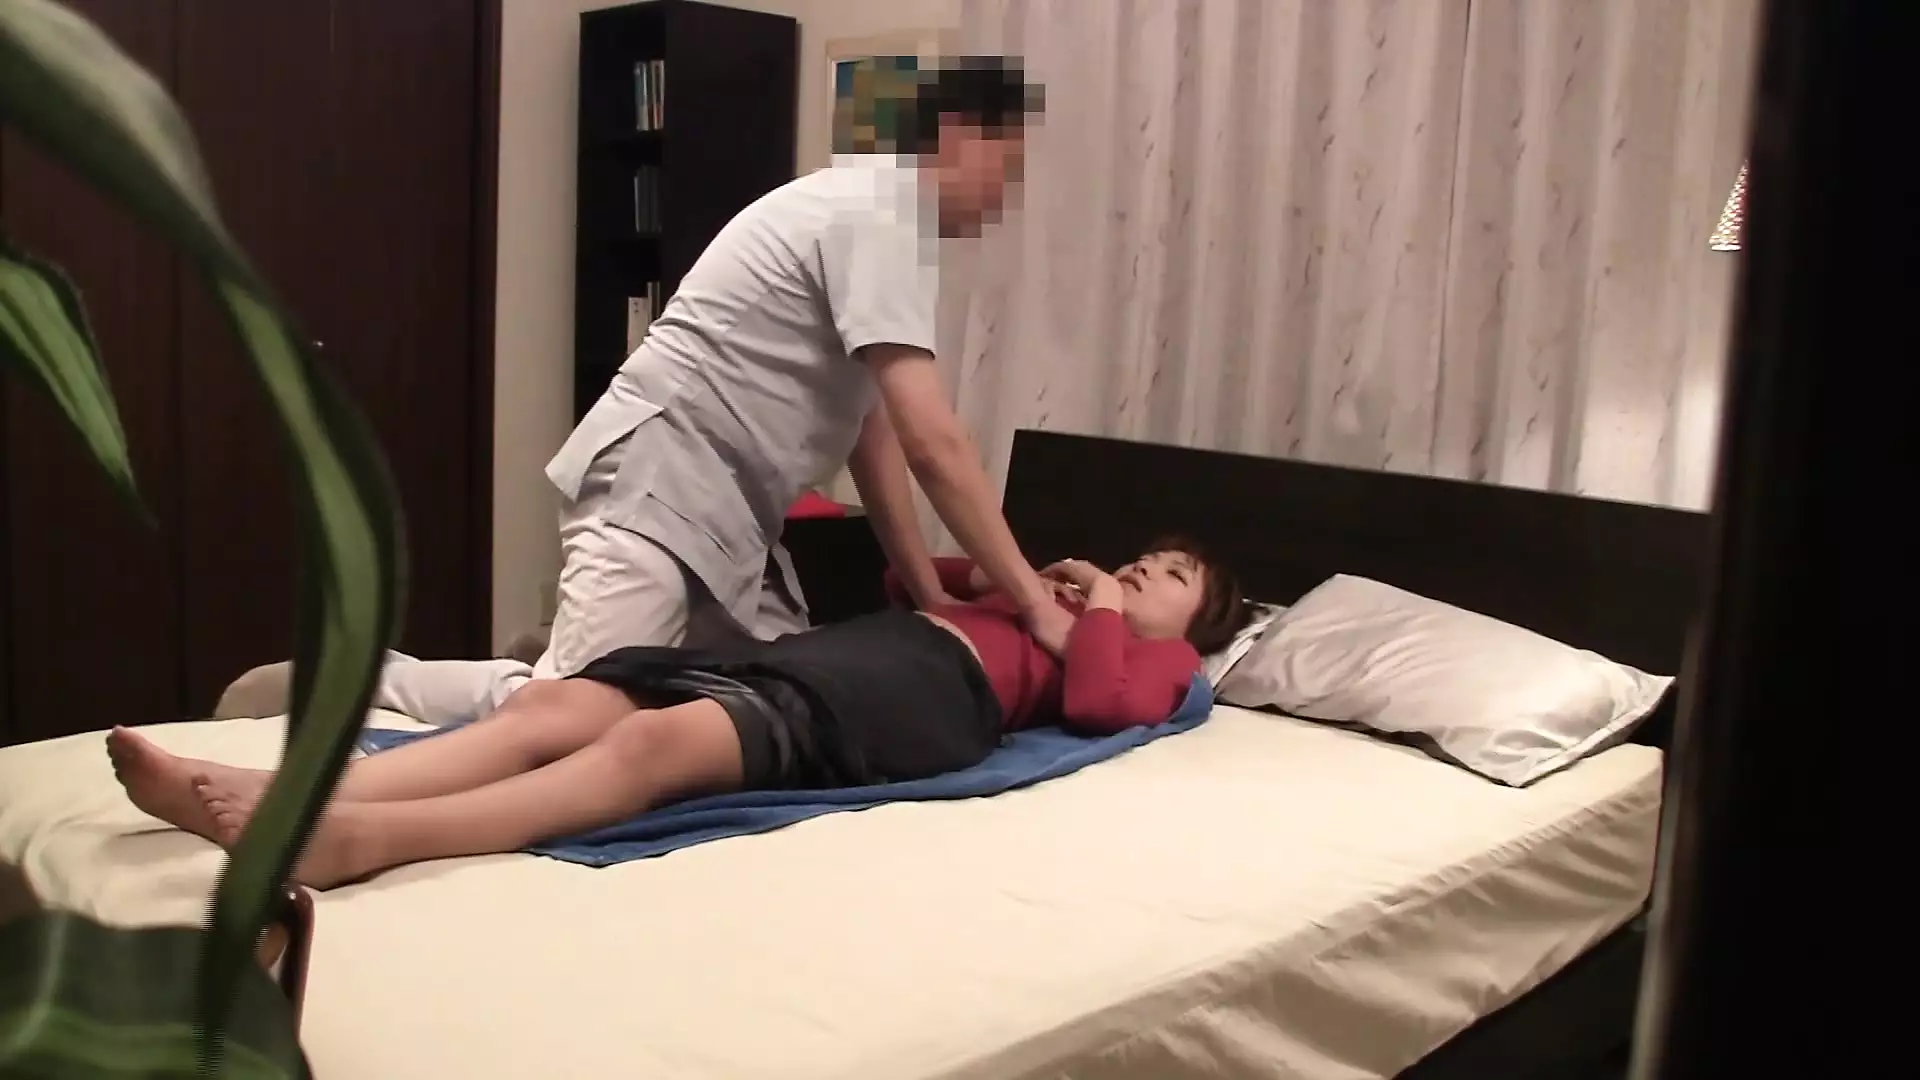 married women tricked into massage